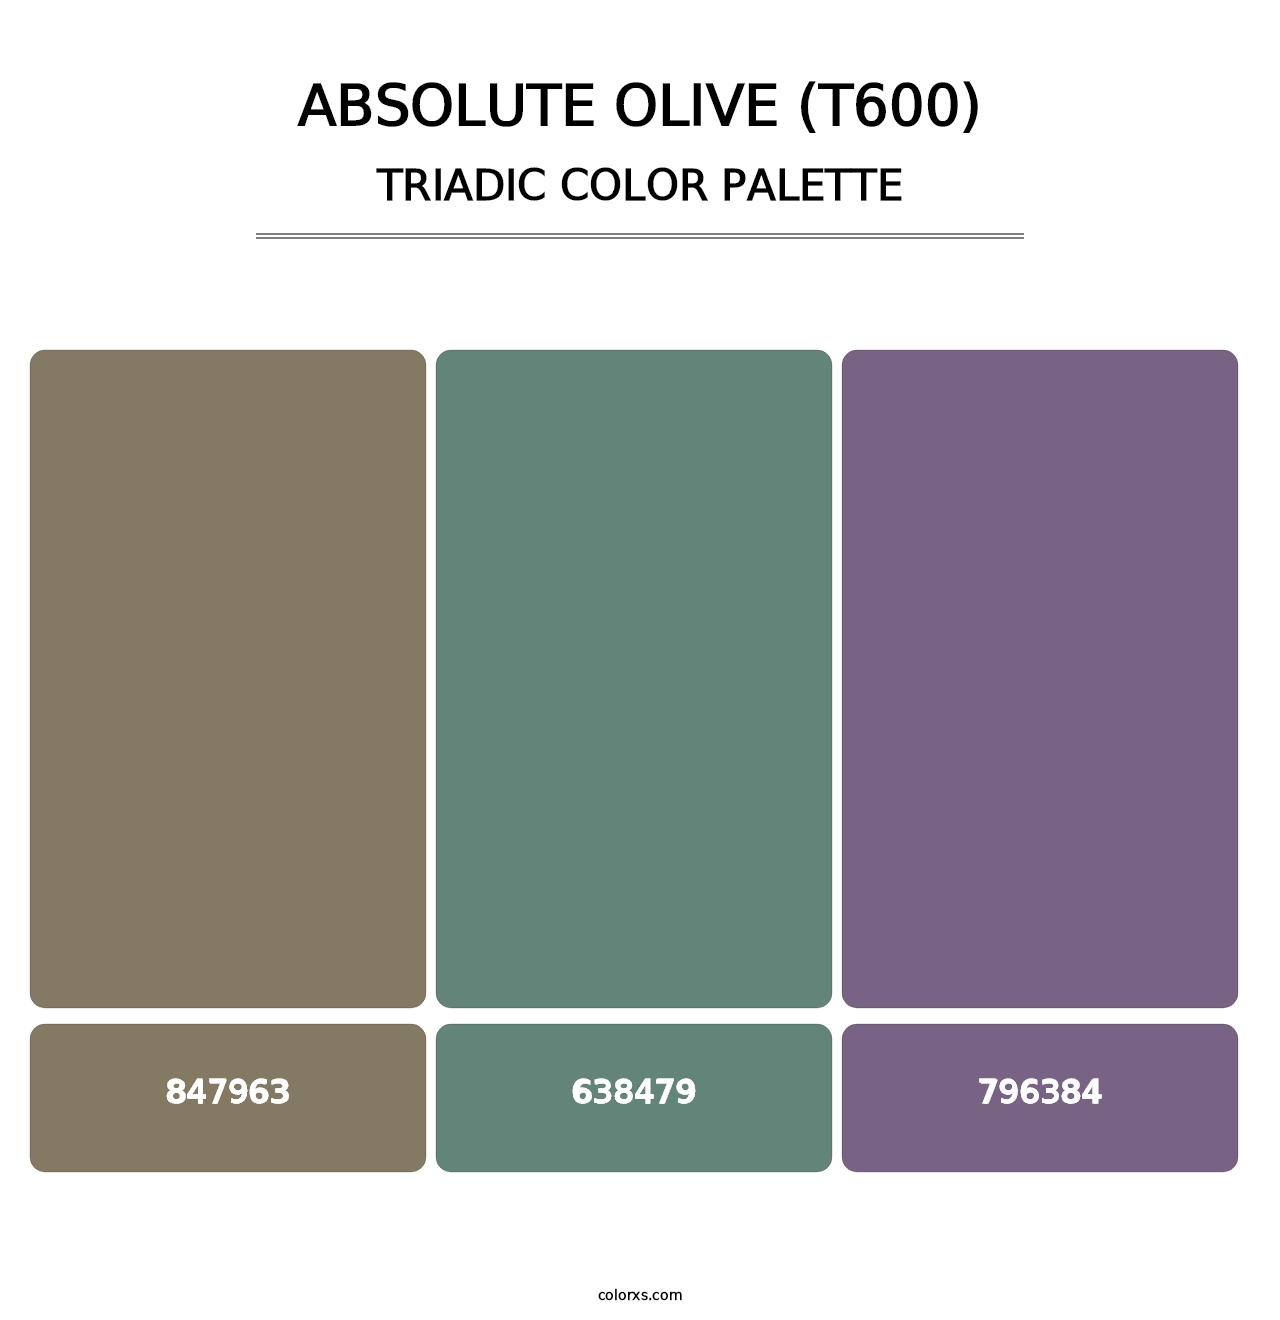 Absolute Olive (T600) - Triadic Color Palette